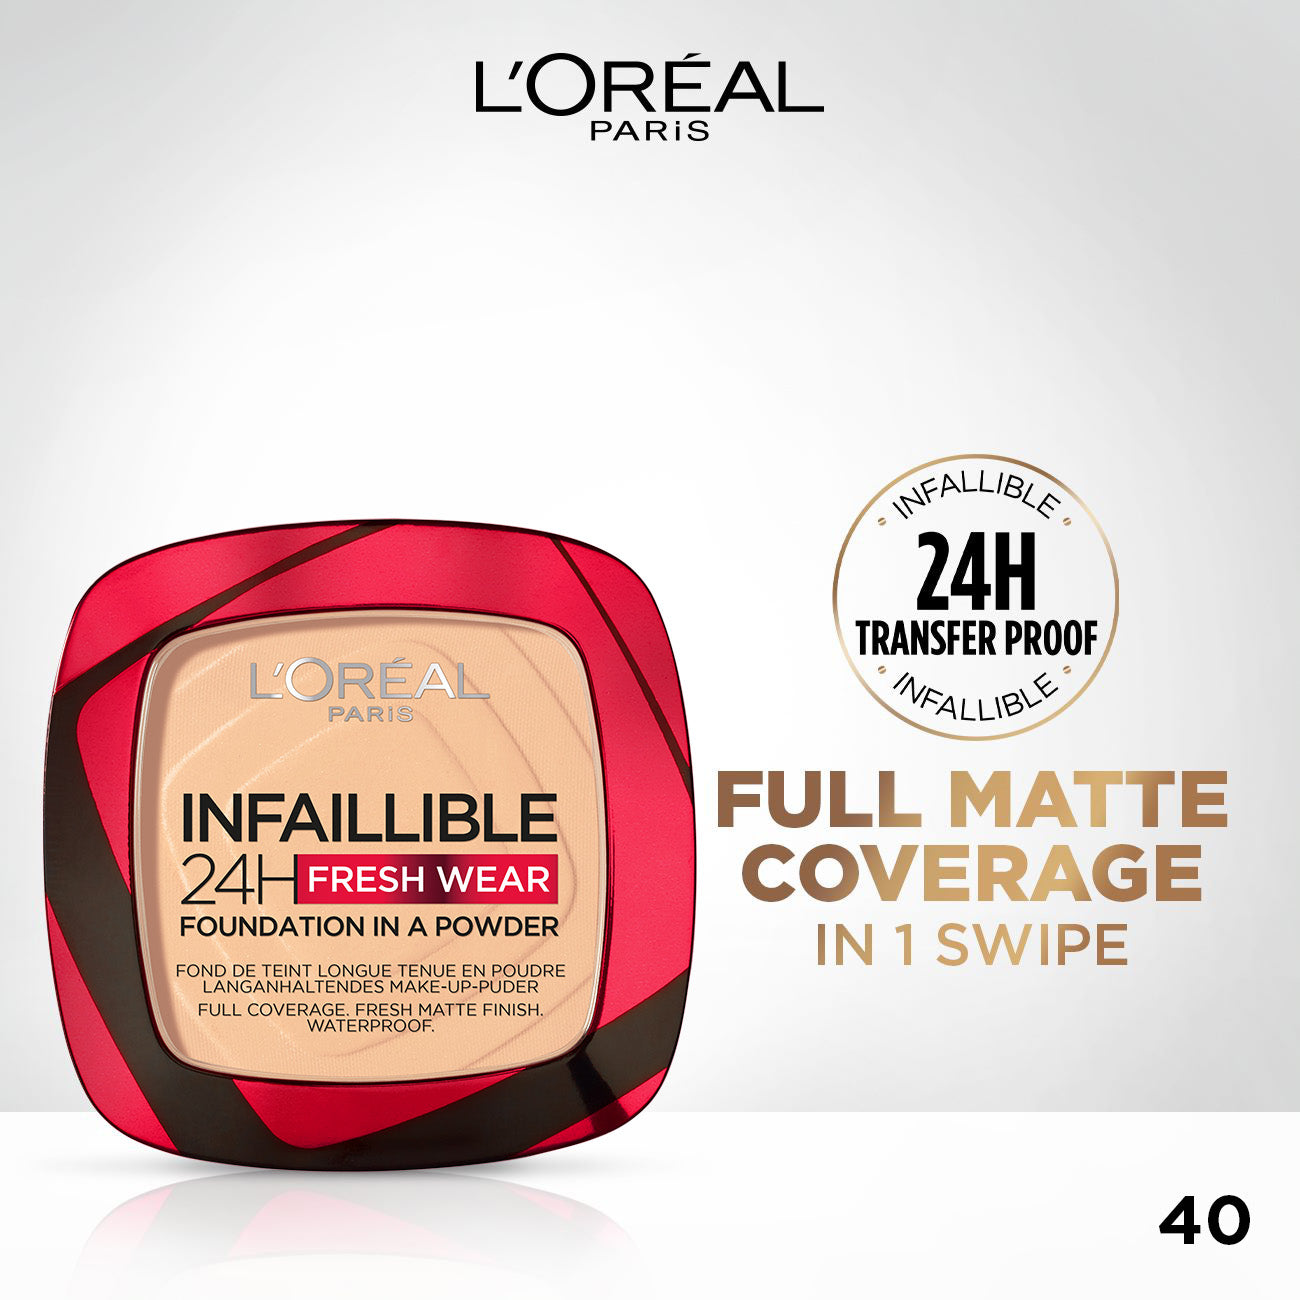 L'oreal Paris Infallible Up To 24h Fresh Wear Foundation In A